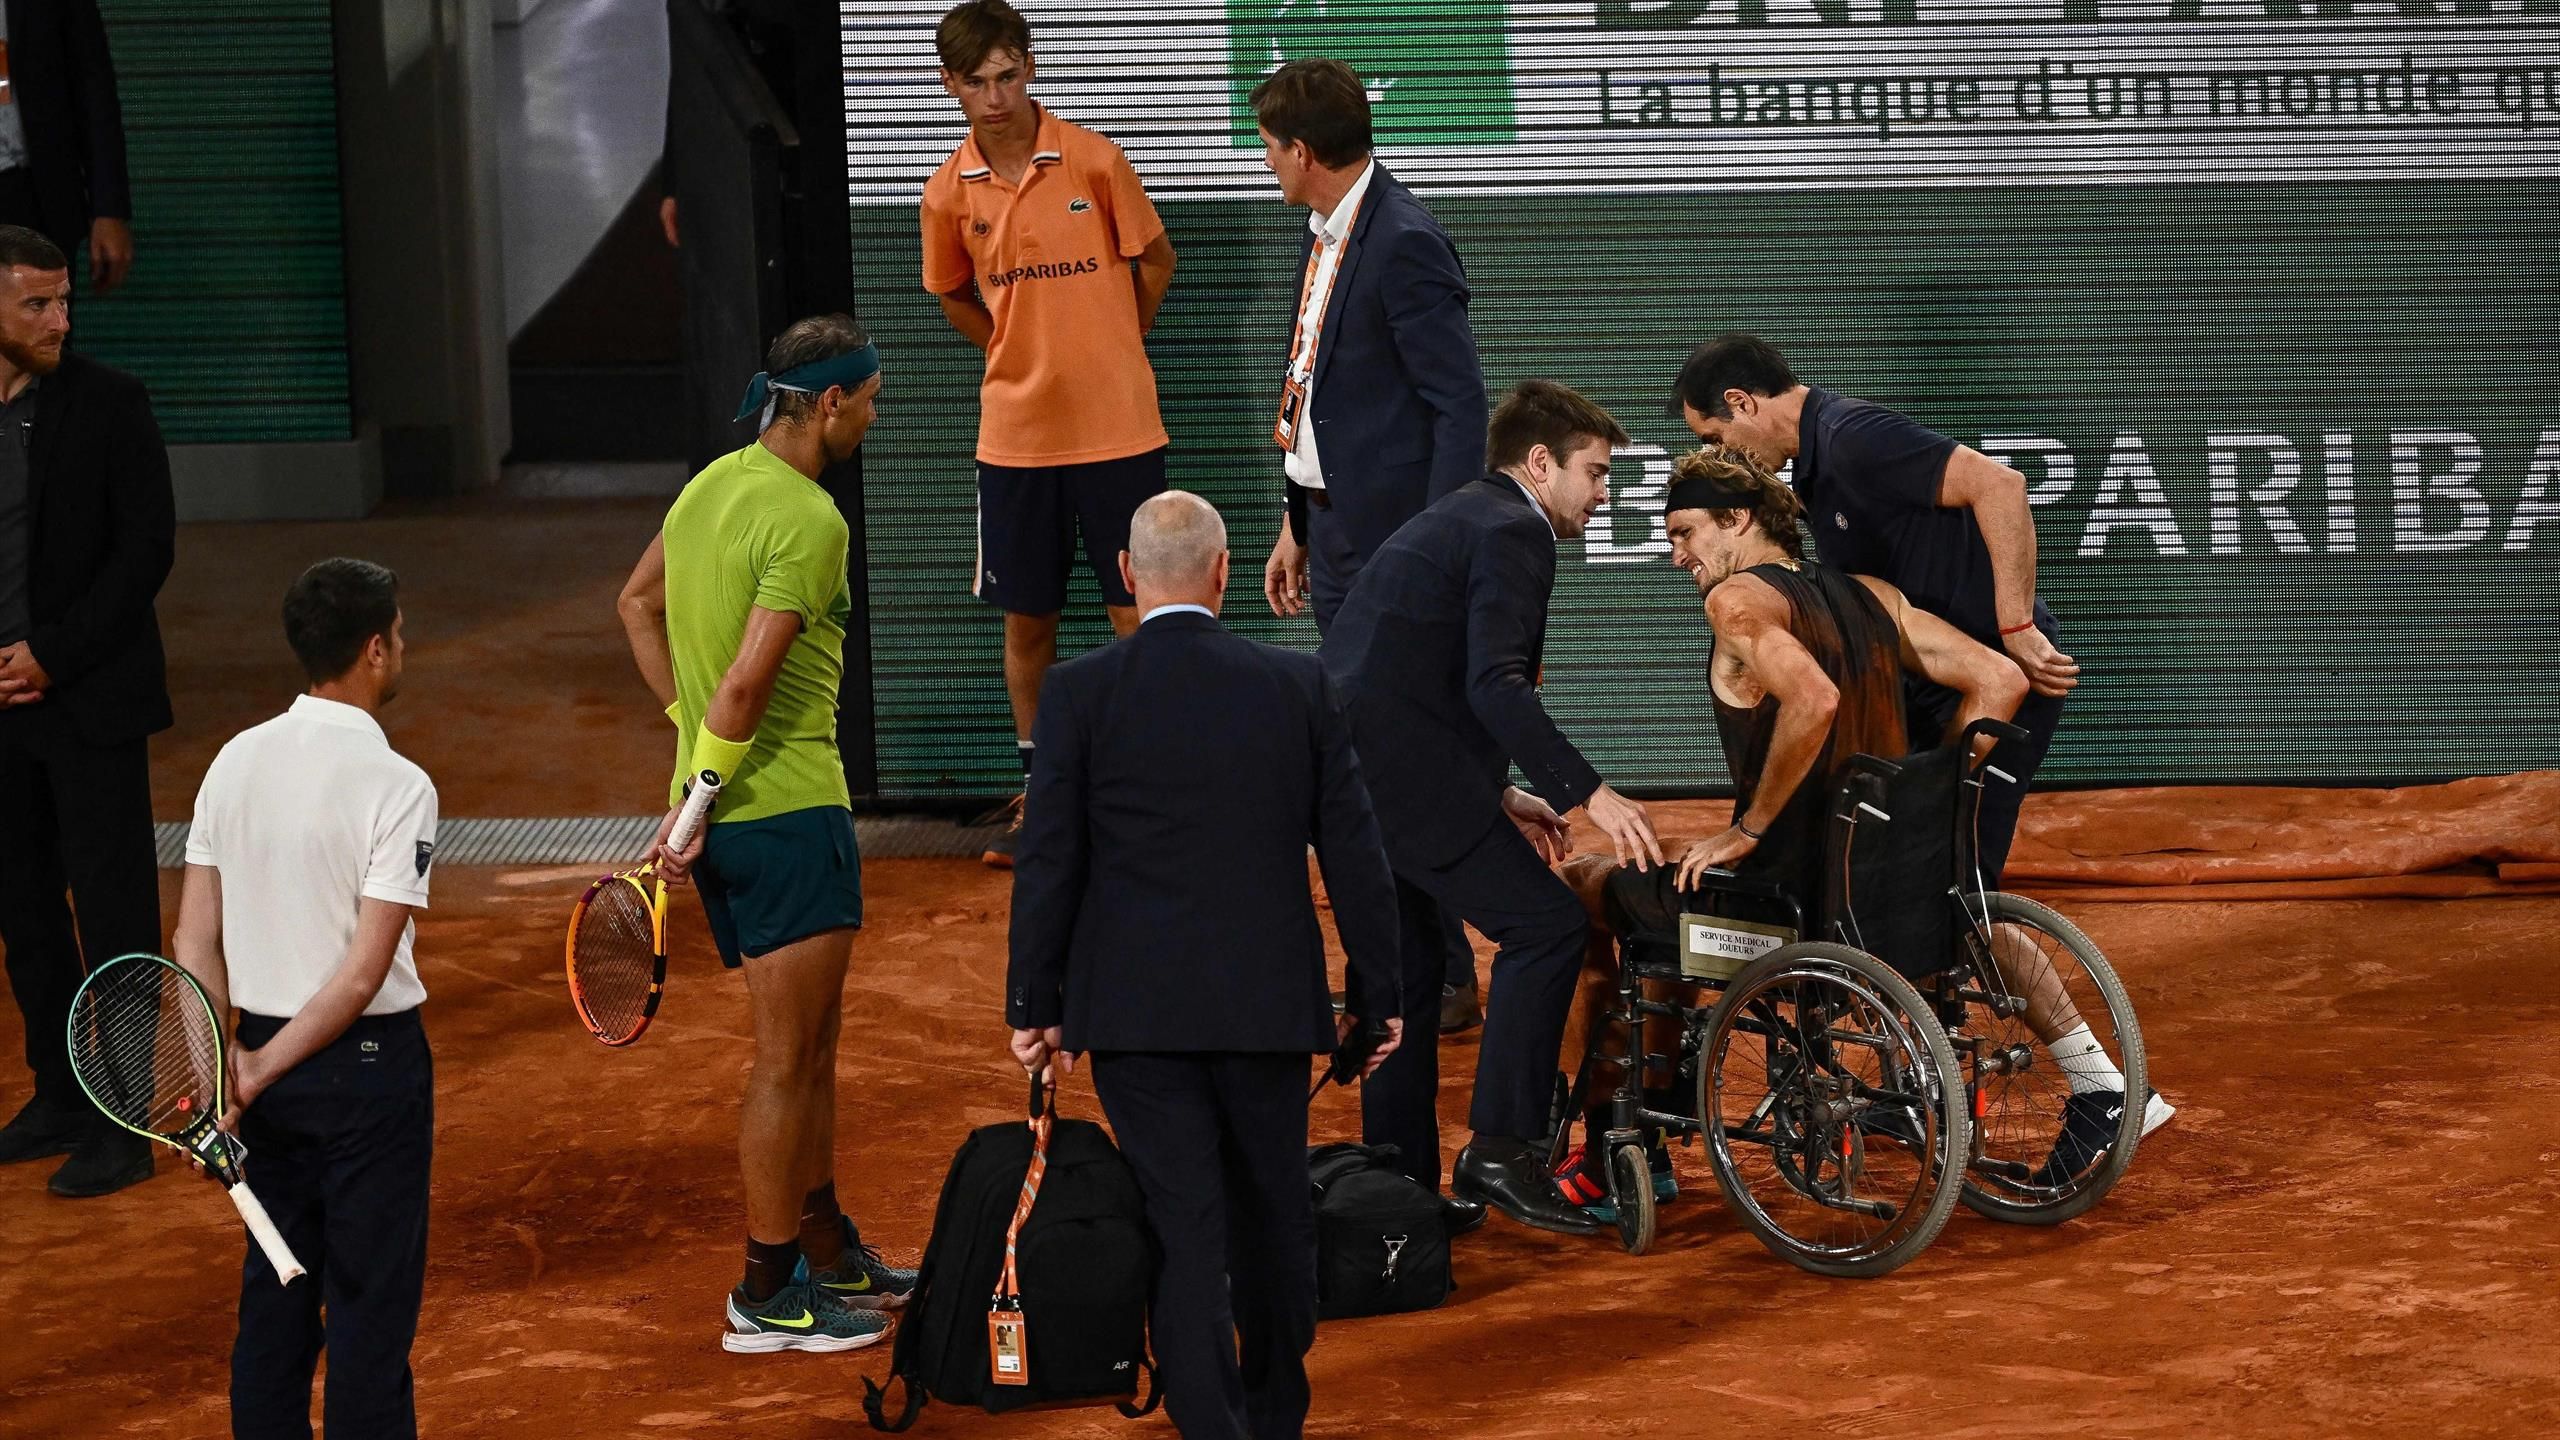 Rafael Nadal into final, Alexander Zverev leaves court in wheelchair after shocking injury in French Open